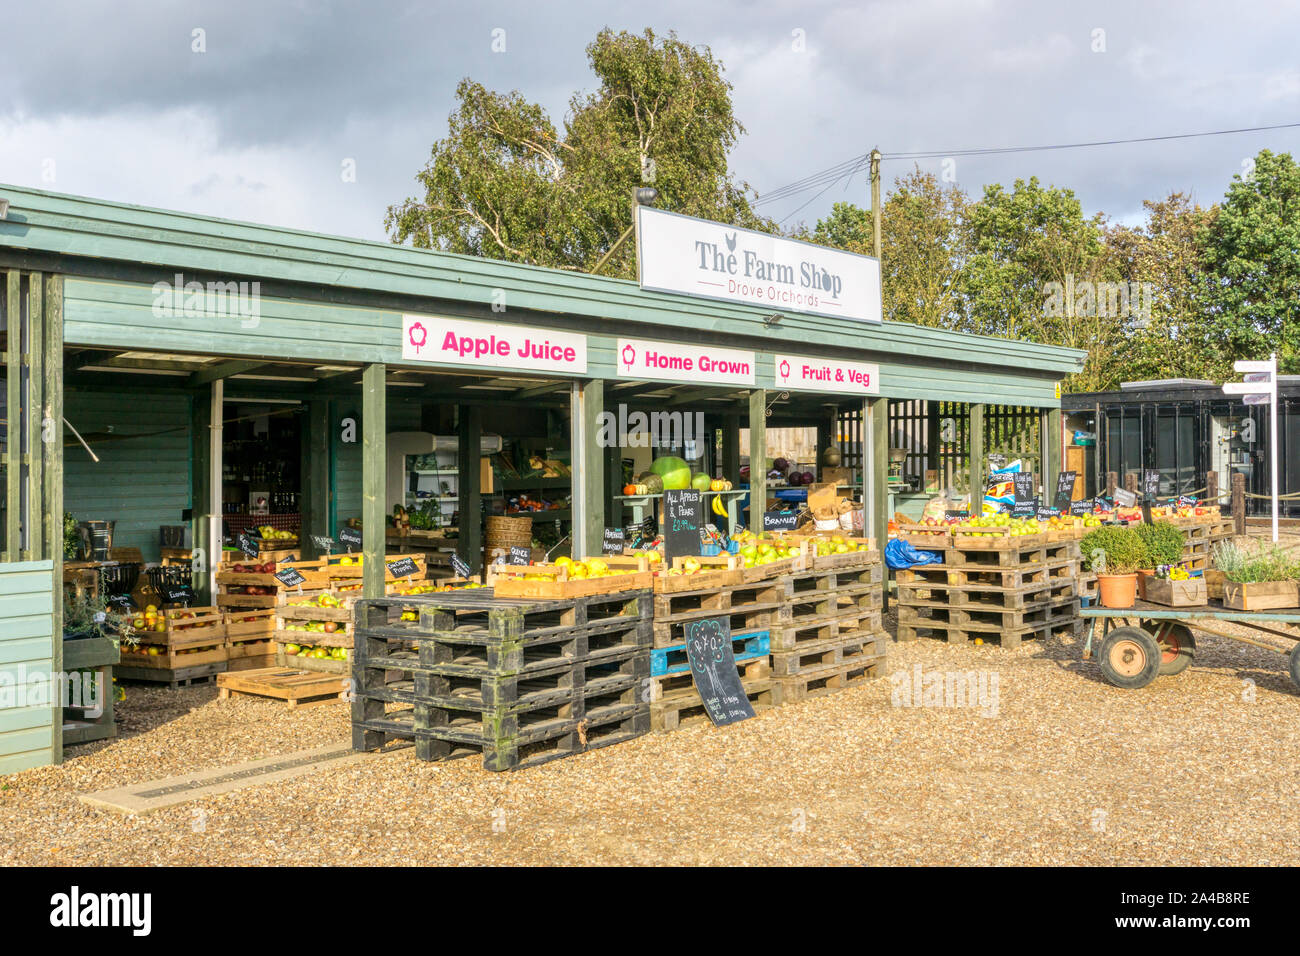 Drove Orchards Farm Shop in Thornham on the North Norfolk coast. Stock Photo